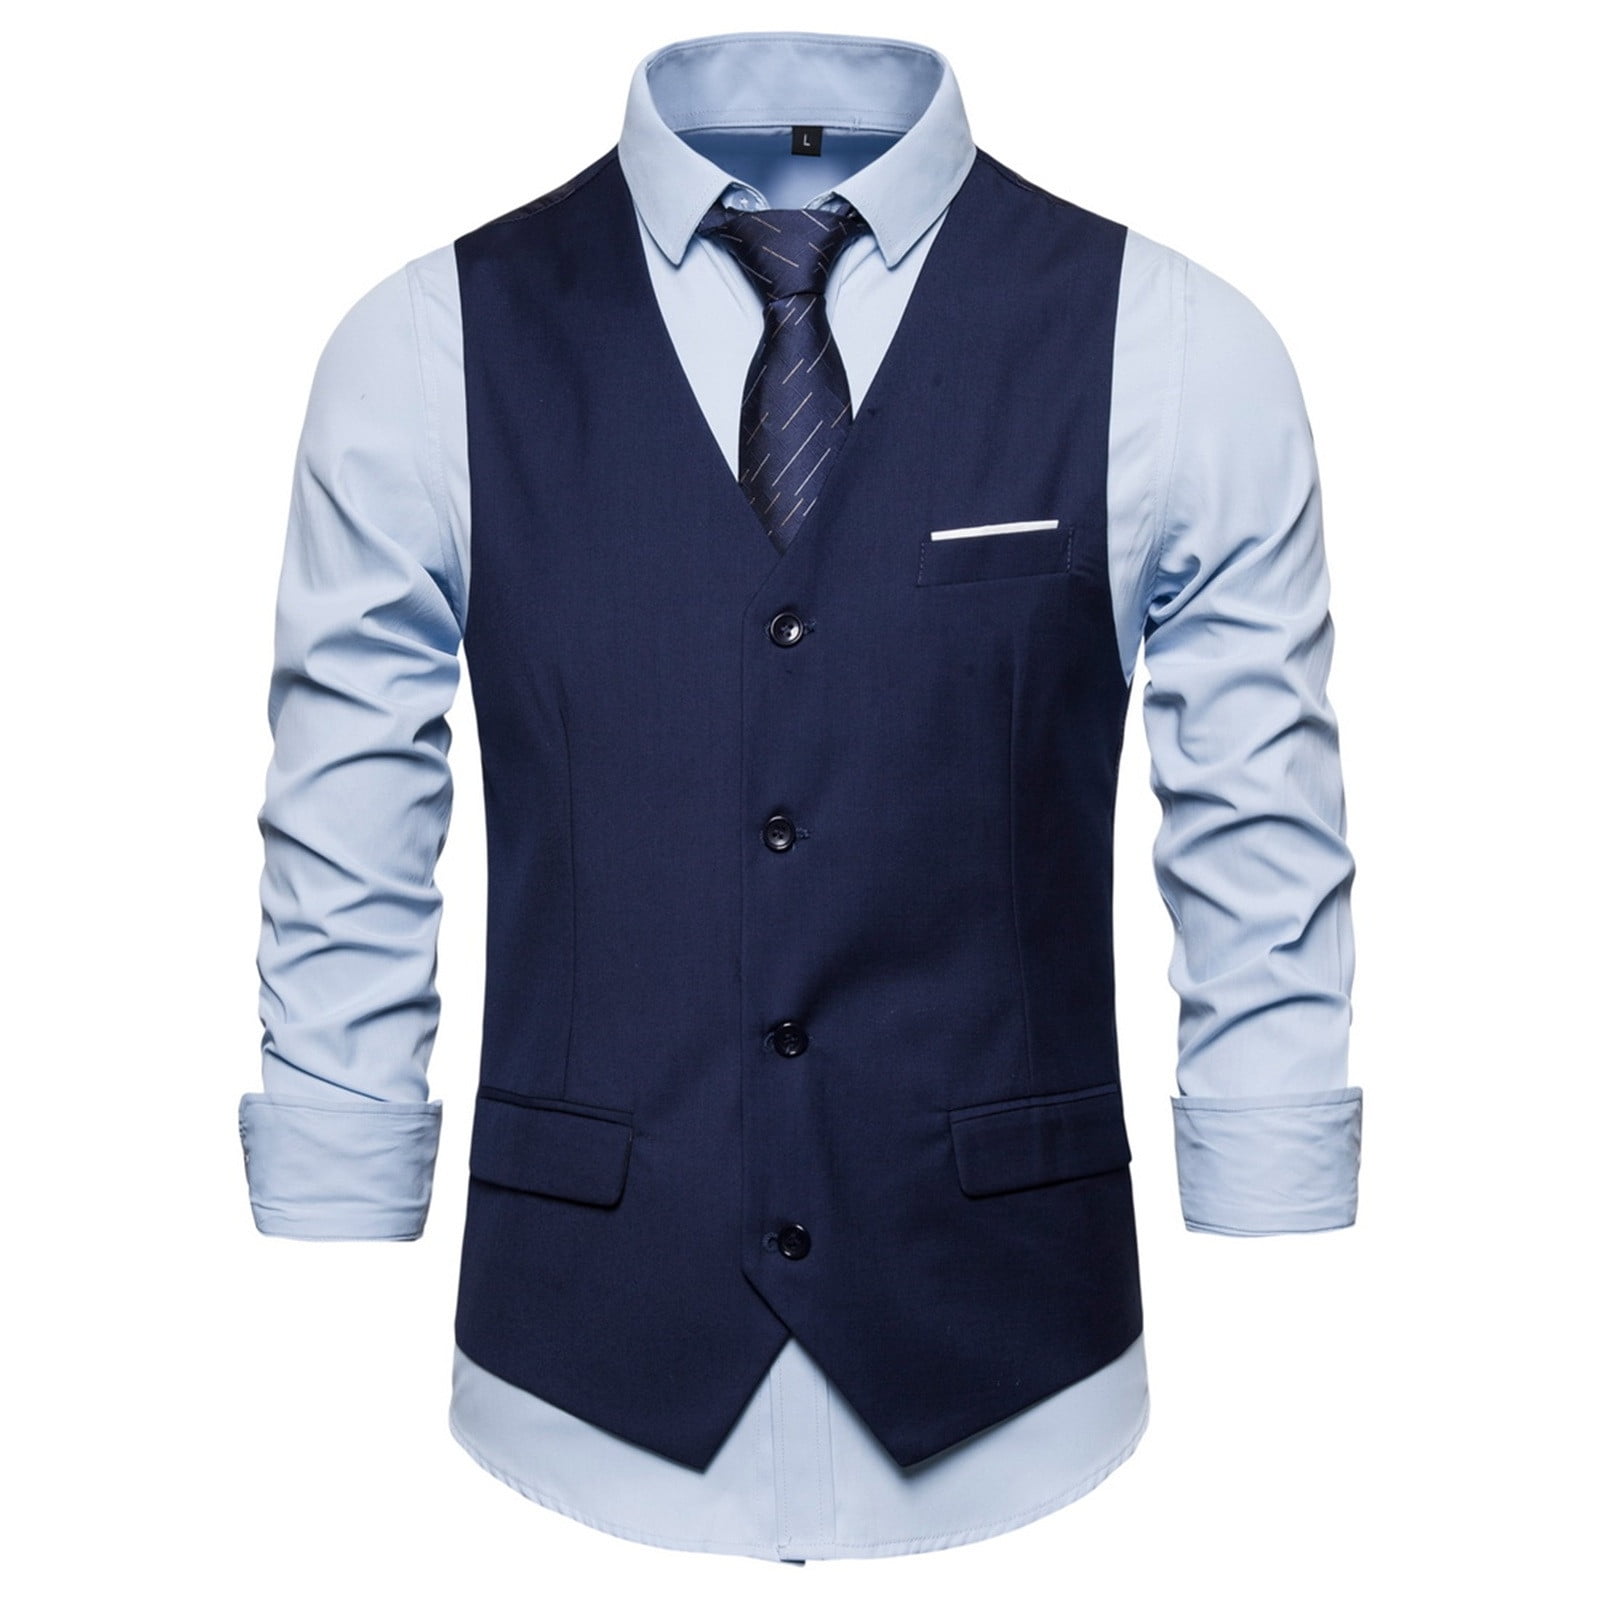 BELLZELY Blazers for Men Big and Tall Clearance Men\'s Spring Spring Formal  Bussiness Tuxedo Suit Waistcoat Vest Jacket Top Coat | Steppwesten